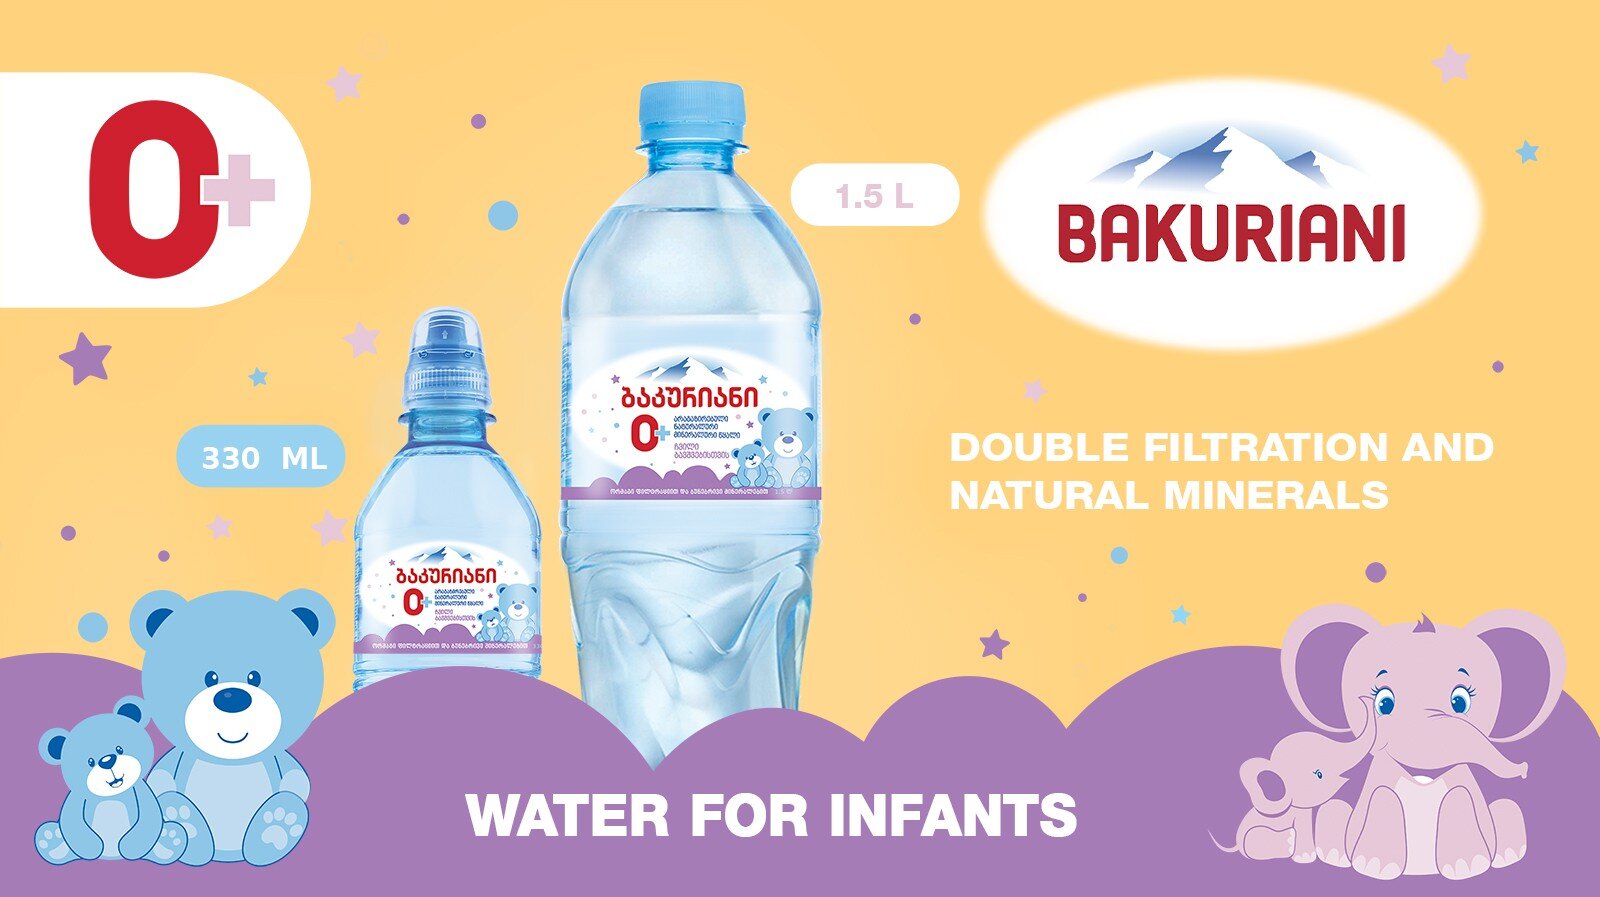 “Bakuriani 0+” - water for infants With double filtration and natural minerals. For preparing food and drinking from the first day of life